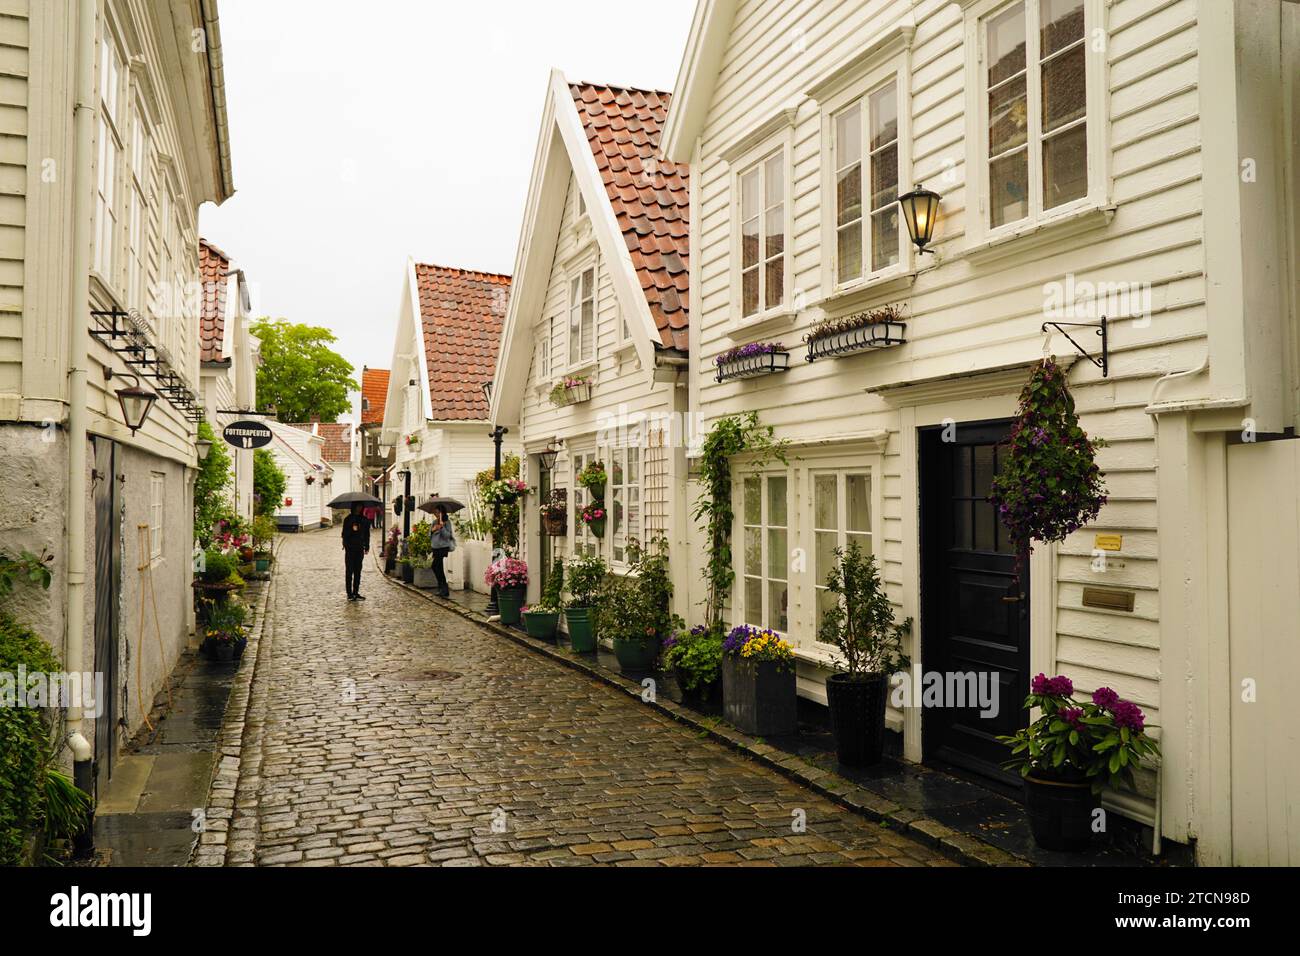 The cobbled streets with wooden houses of Old Stavanger, Norway Stock Photo